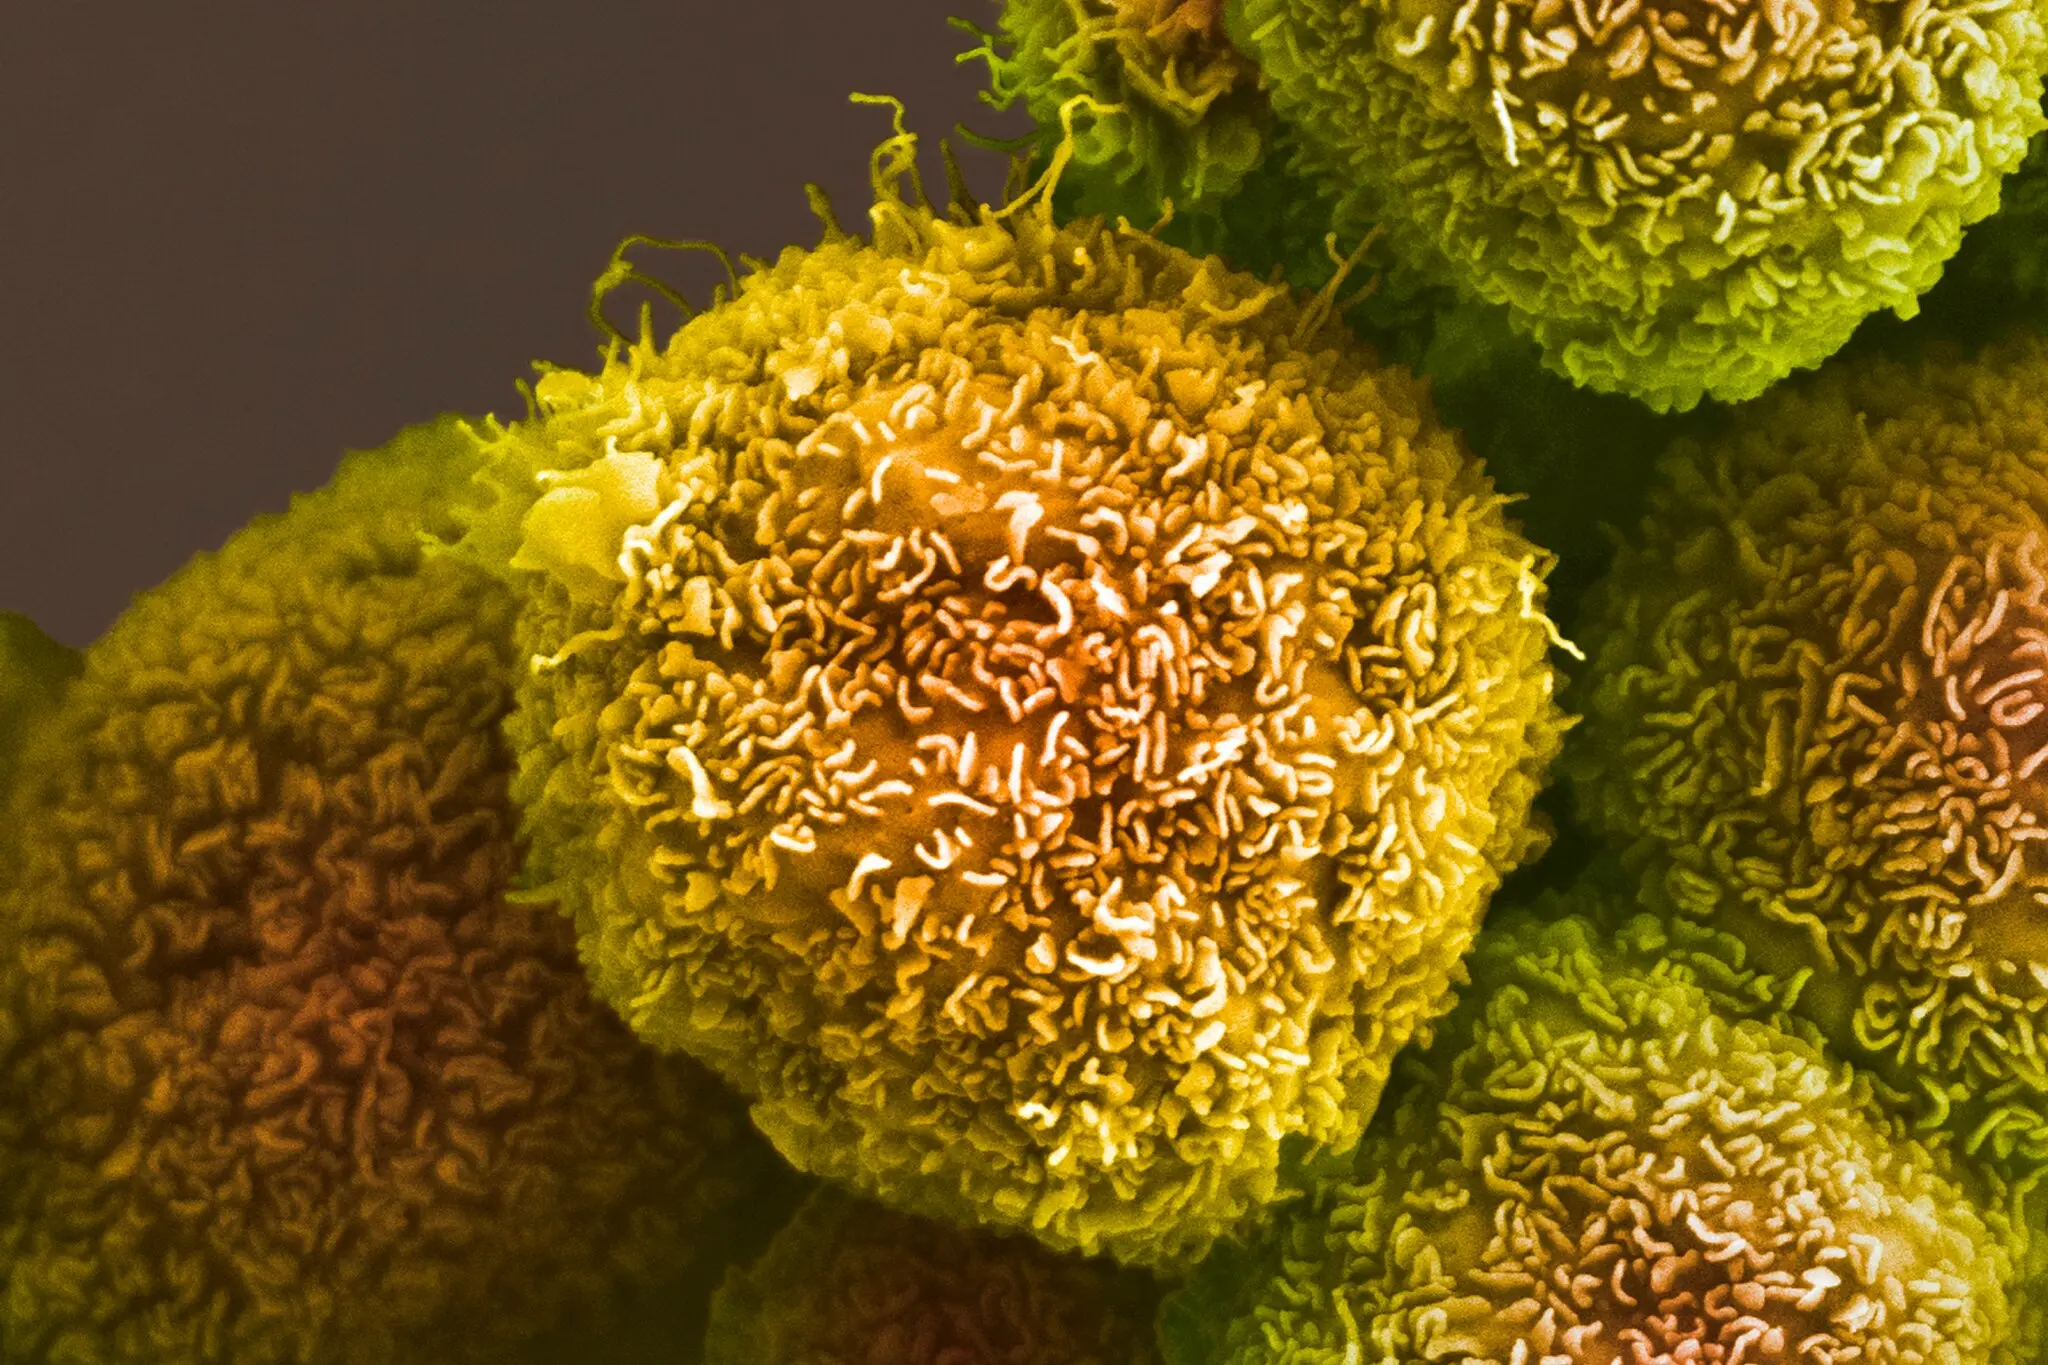 Lustgarten-funded clinical trial yields promising results as the Journal Nature publishes findings: Personalized RNA neoantigen vaccines stimulate T cells in pancreatic cancer.